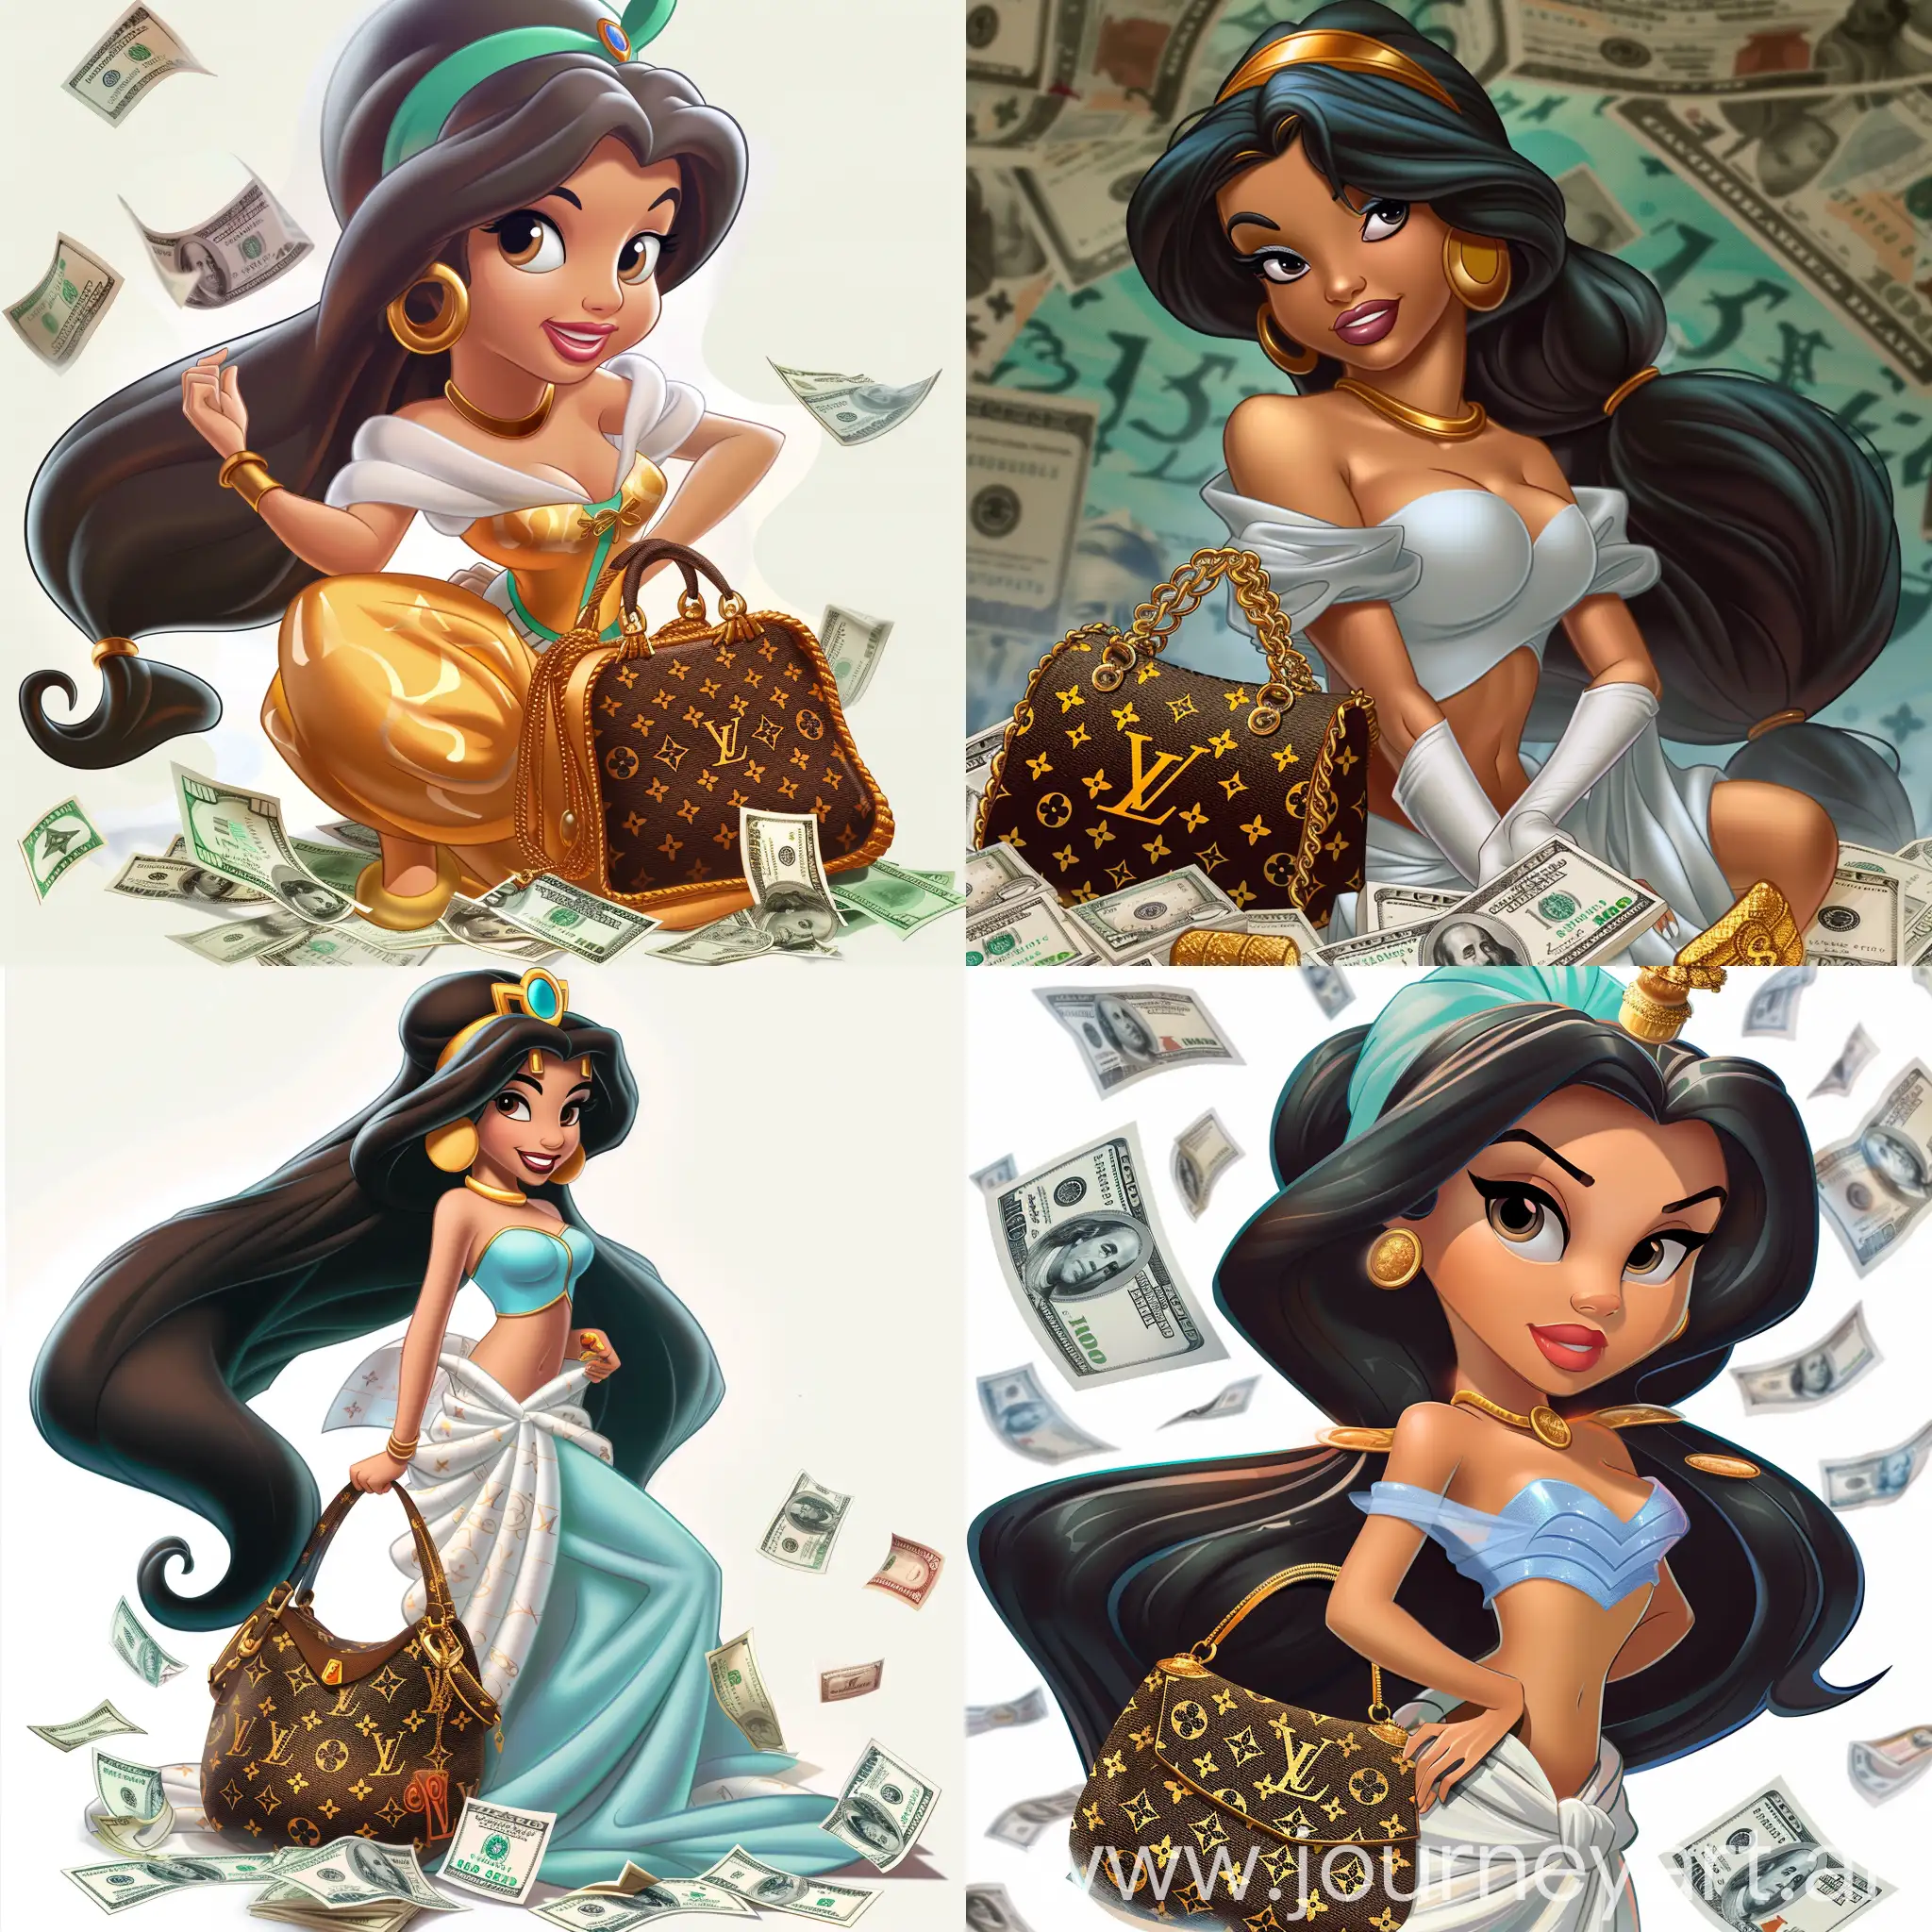 Princess Jasmine, with a Louis Vuitton bag. There is a lot of money scattered around, dollars. Everything is in the style of a cartoon.